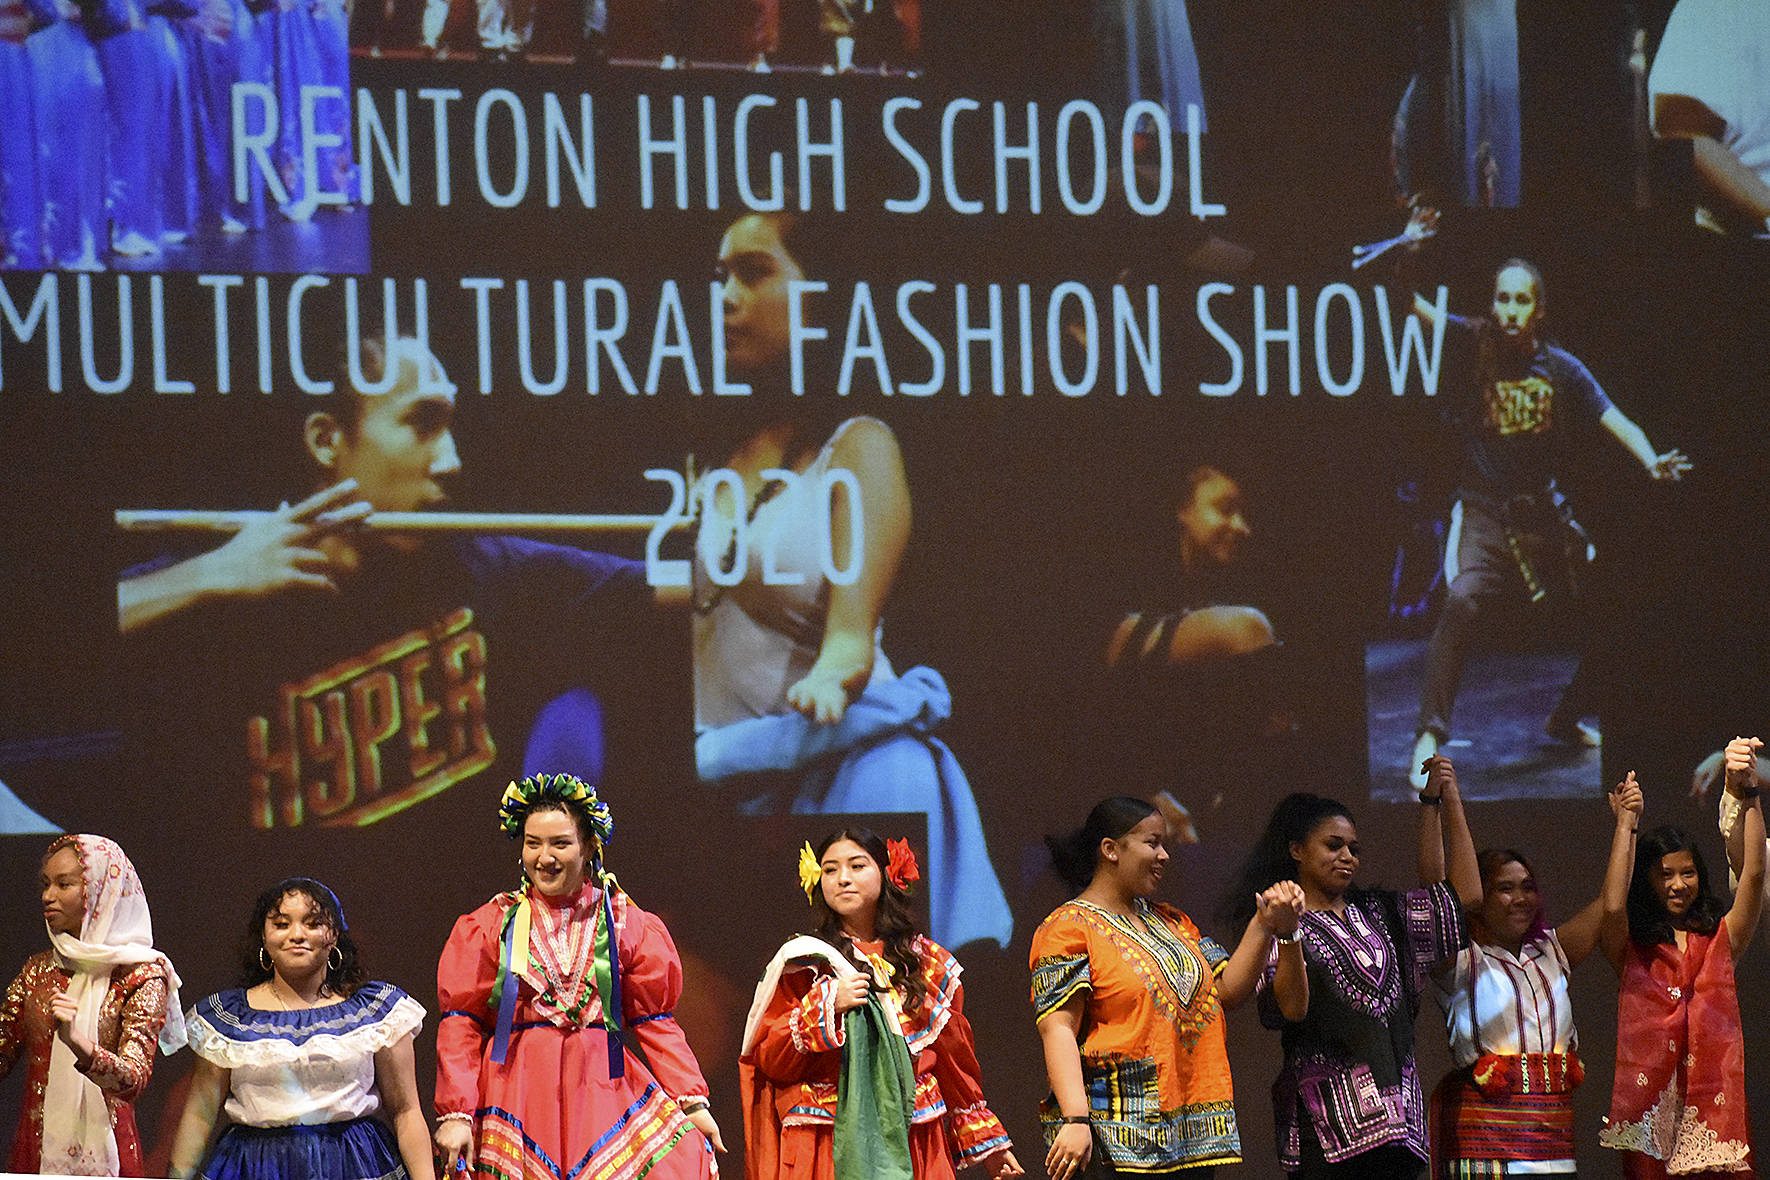 Photo by Haley Ausbun. An annual event, Renton High School students showed off their culture, heritage and interests through the 2020 Renton Multicultural Show, Feb. 7 and Feb. 8 at the IKEA Performing Arts Center. The student hosts of the event opened up by saying that Renton High School holds the event each year as a chance to get their one big family into the room together in “reunion.” Performances included the Multicultural Fashion Show, Black Student Union, Latinx Student Union, K-pop and J-pop performances, Filipino Club and many more.